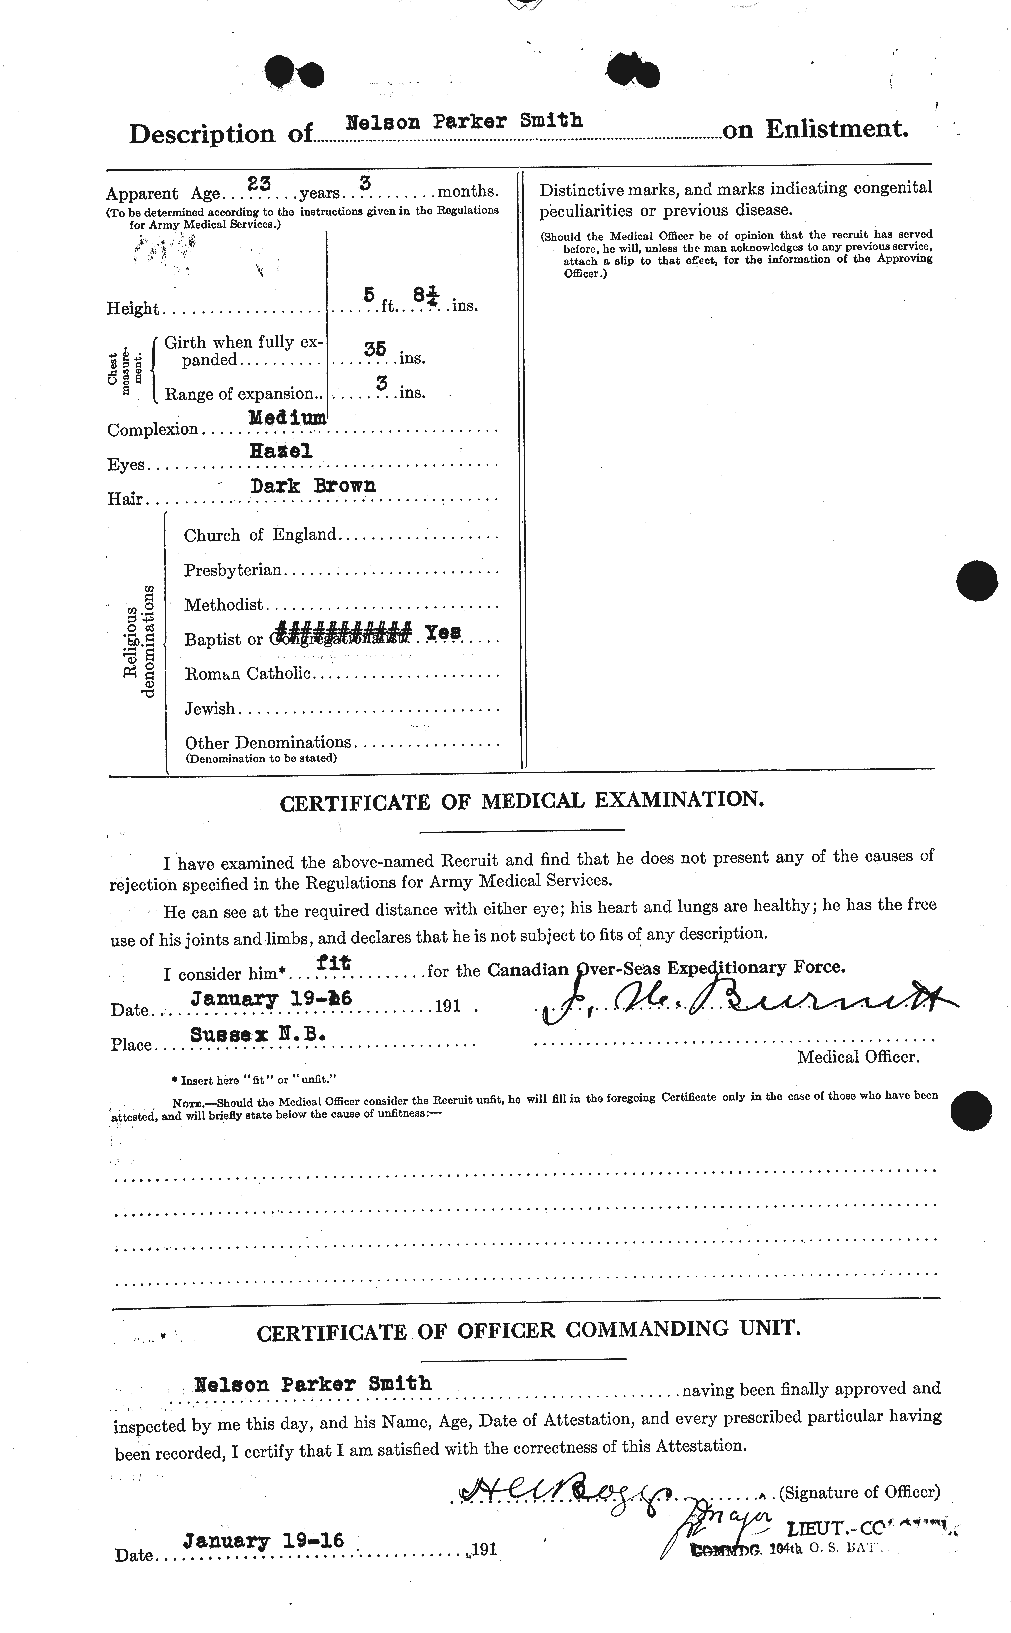 Personnel Records of the First World War - CEF 104168b